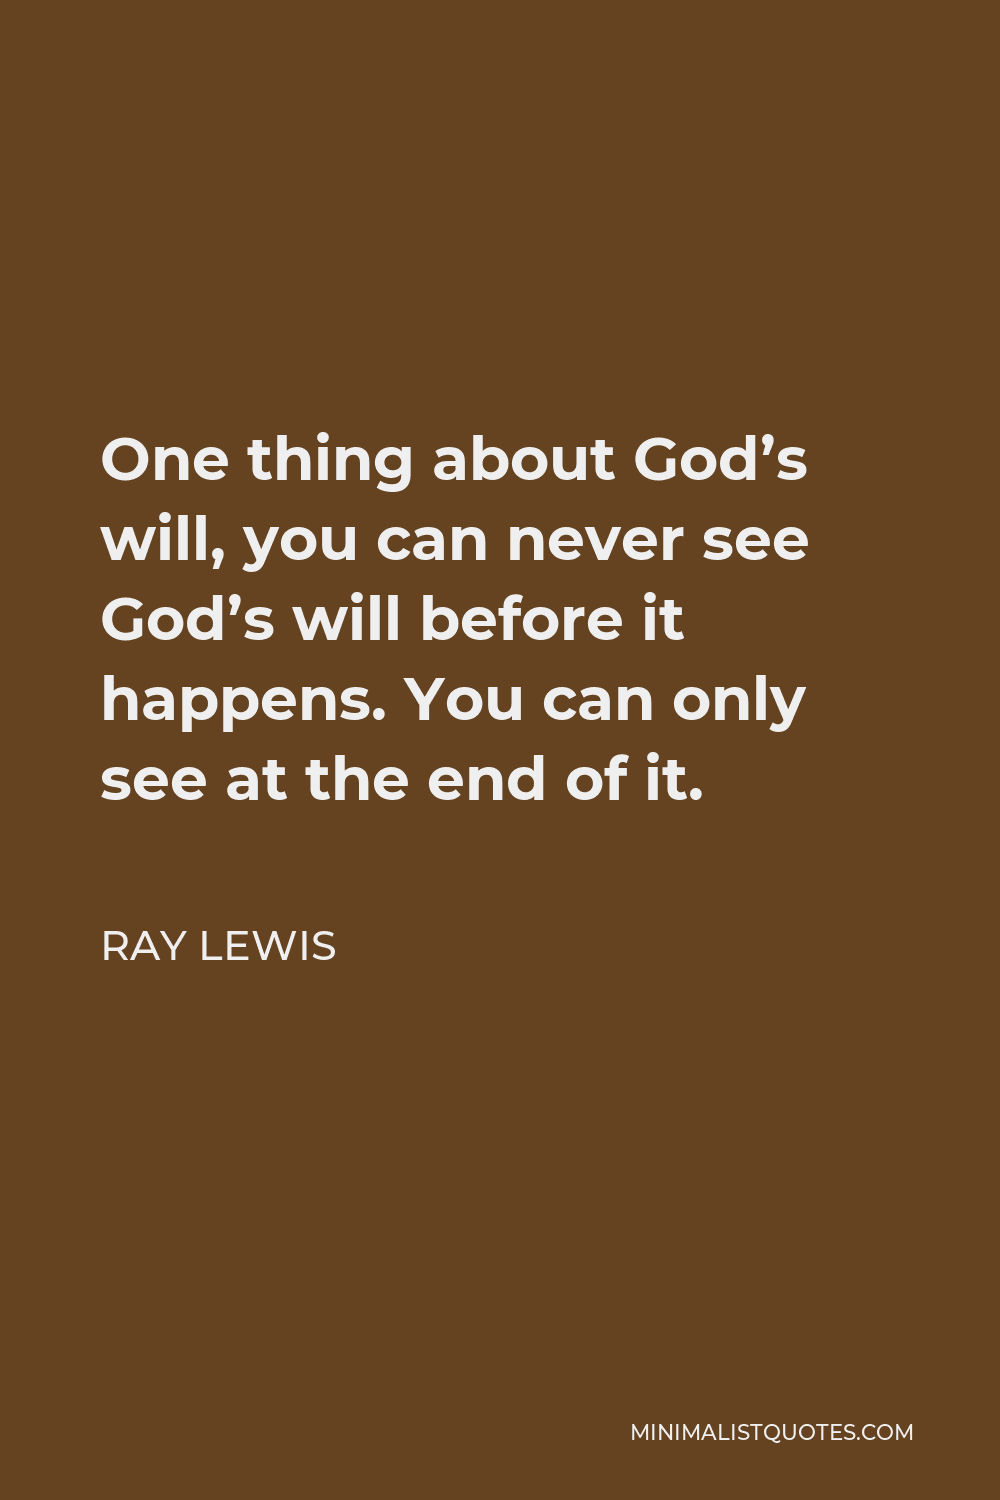 Ray Lewis Quote - One thing about God’s will, you can never see God’s will before it happens. You can only see at the end of it.